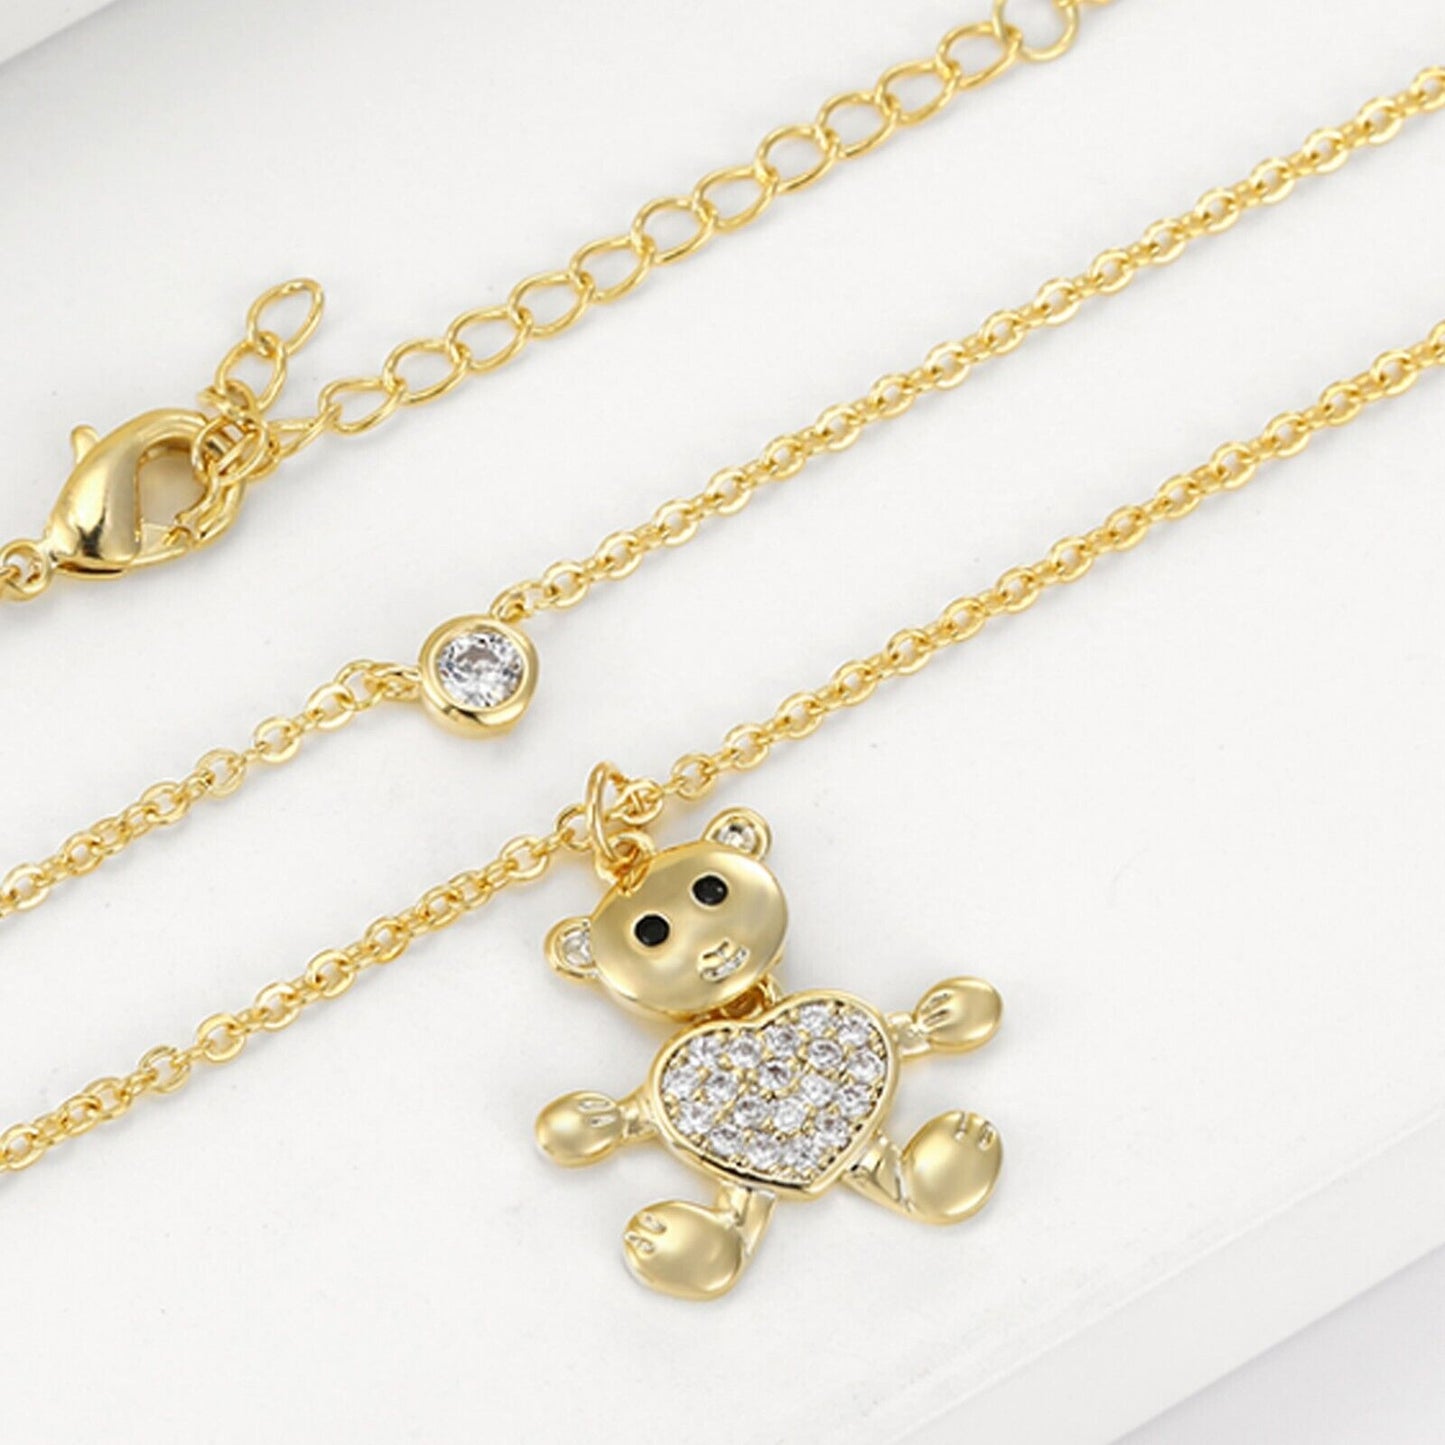 Necklaces - 14K Gold Plated. Double Chain Necklace Bear w crystal heart charm.